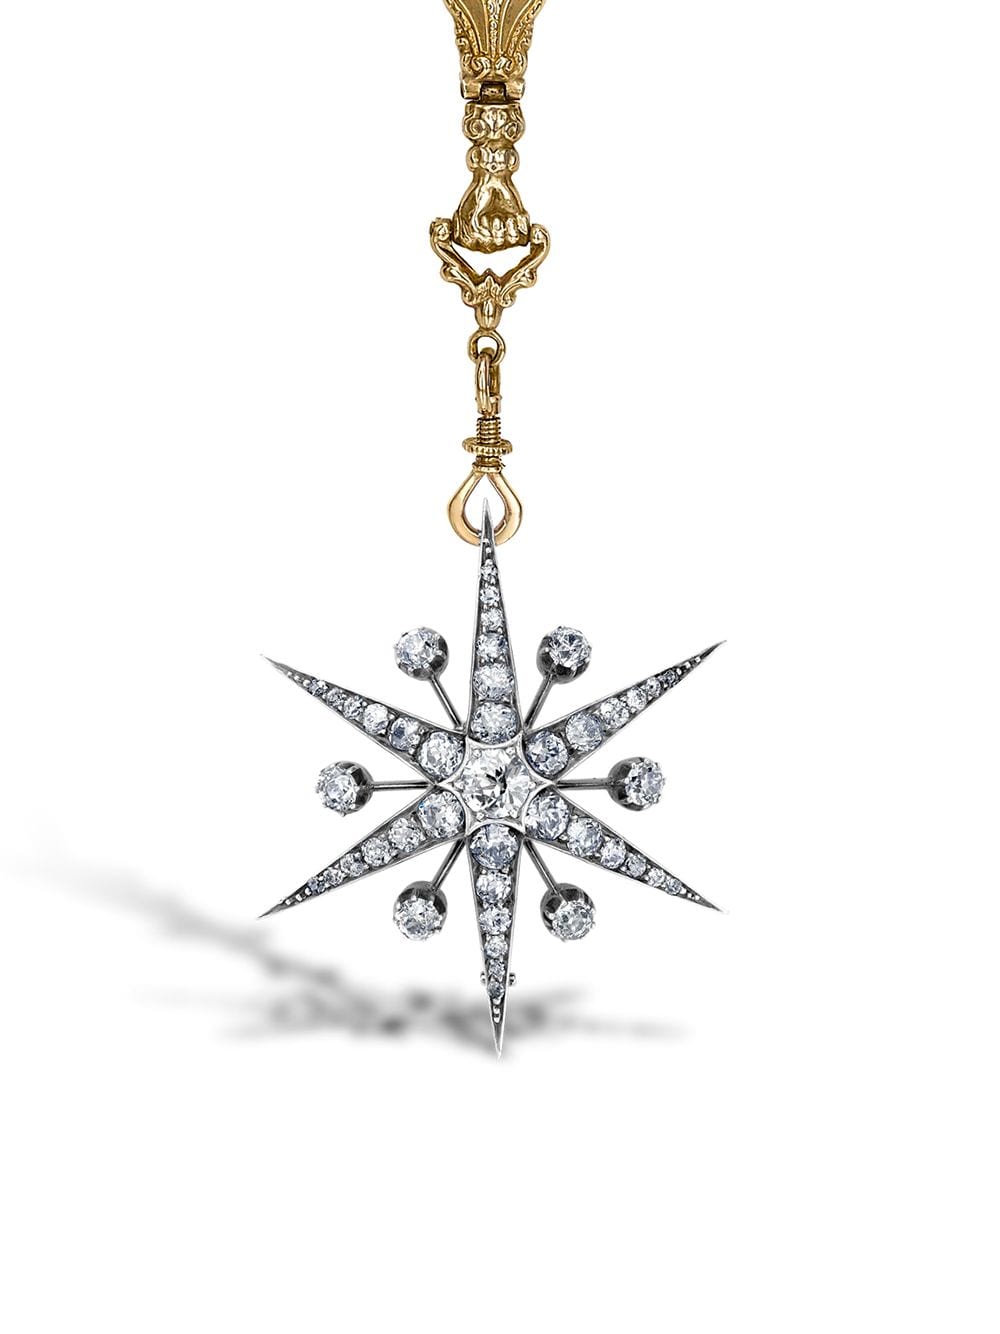 Pre-owned Pragnell Vintage 1837-1901 18kt Yellow Gold Victorian Star Long Pendant Diamond Necklace